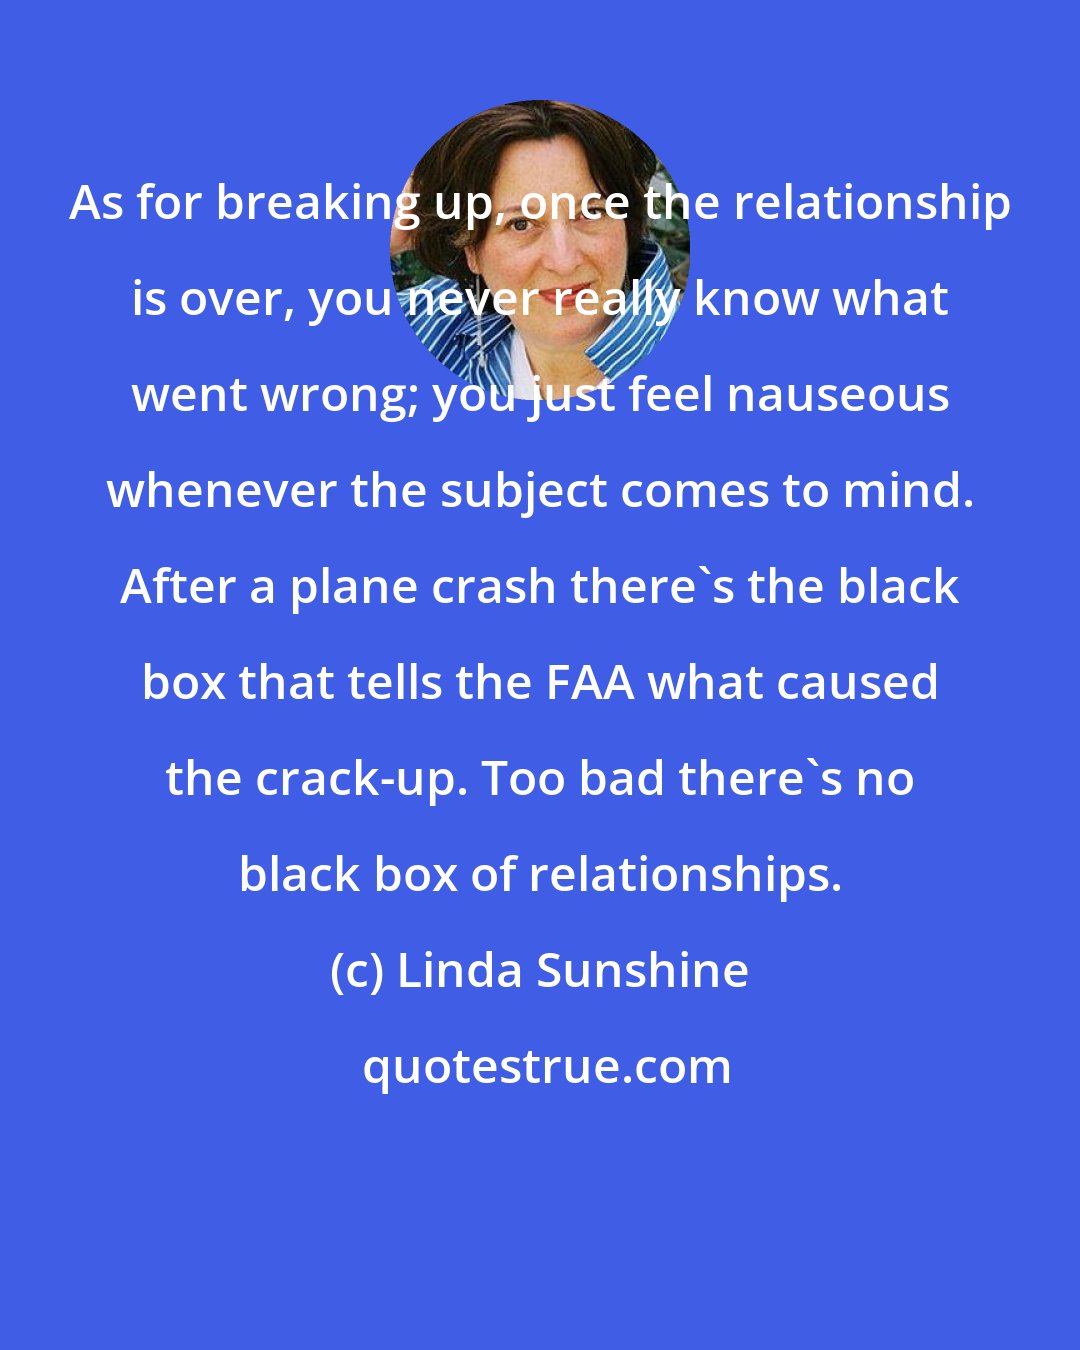 Linda Sunshine: As for breaking up, once the relationship is over, you never really know what went wrong; you just feel nauseous whenever the subject comes to mind. After a plane crash there's the black box that tells the FAA what caused the crack-up. Too bad there's no black box of relationships.